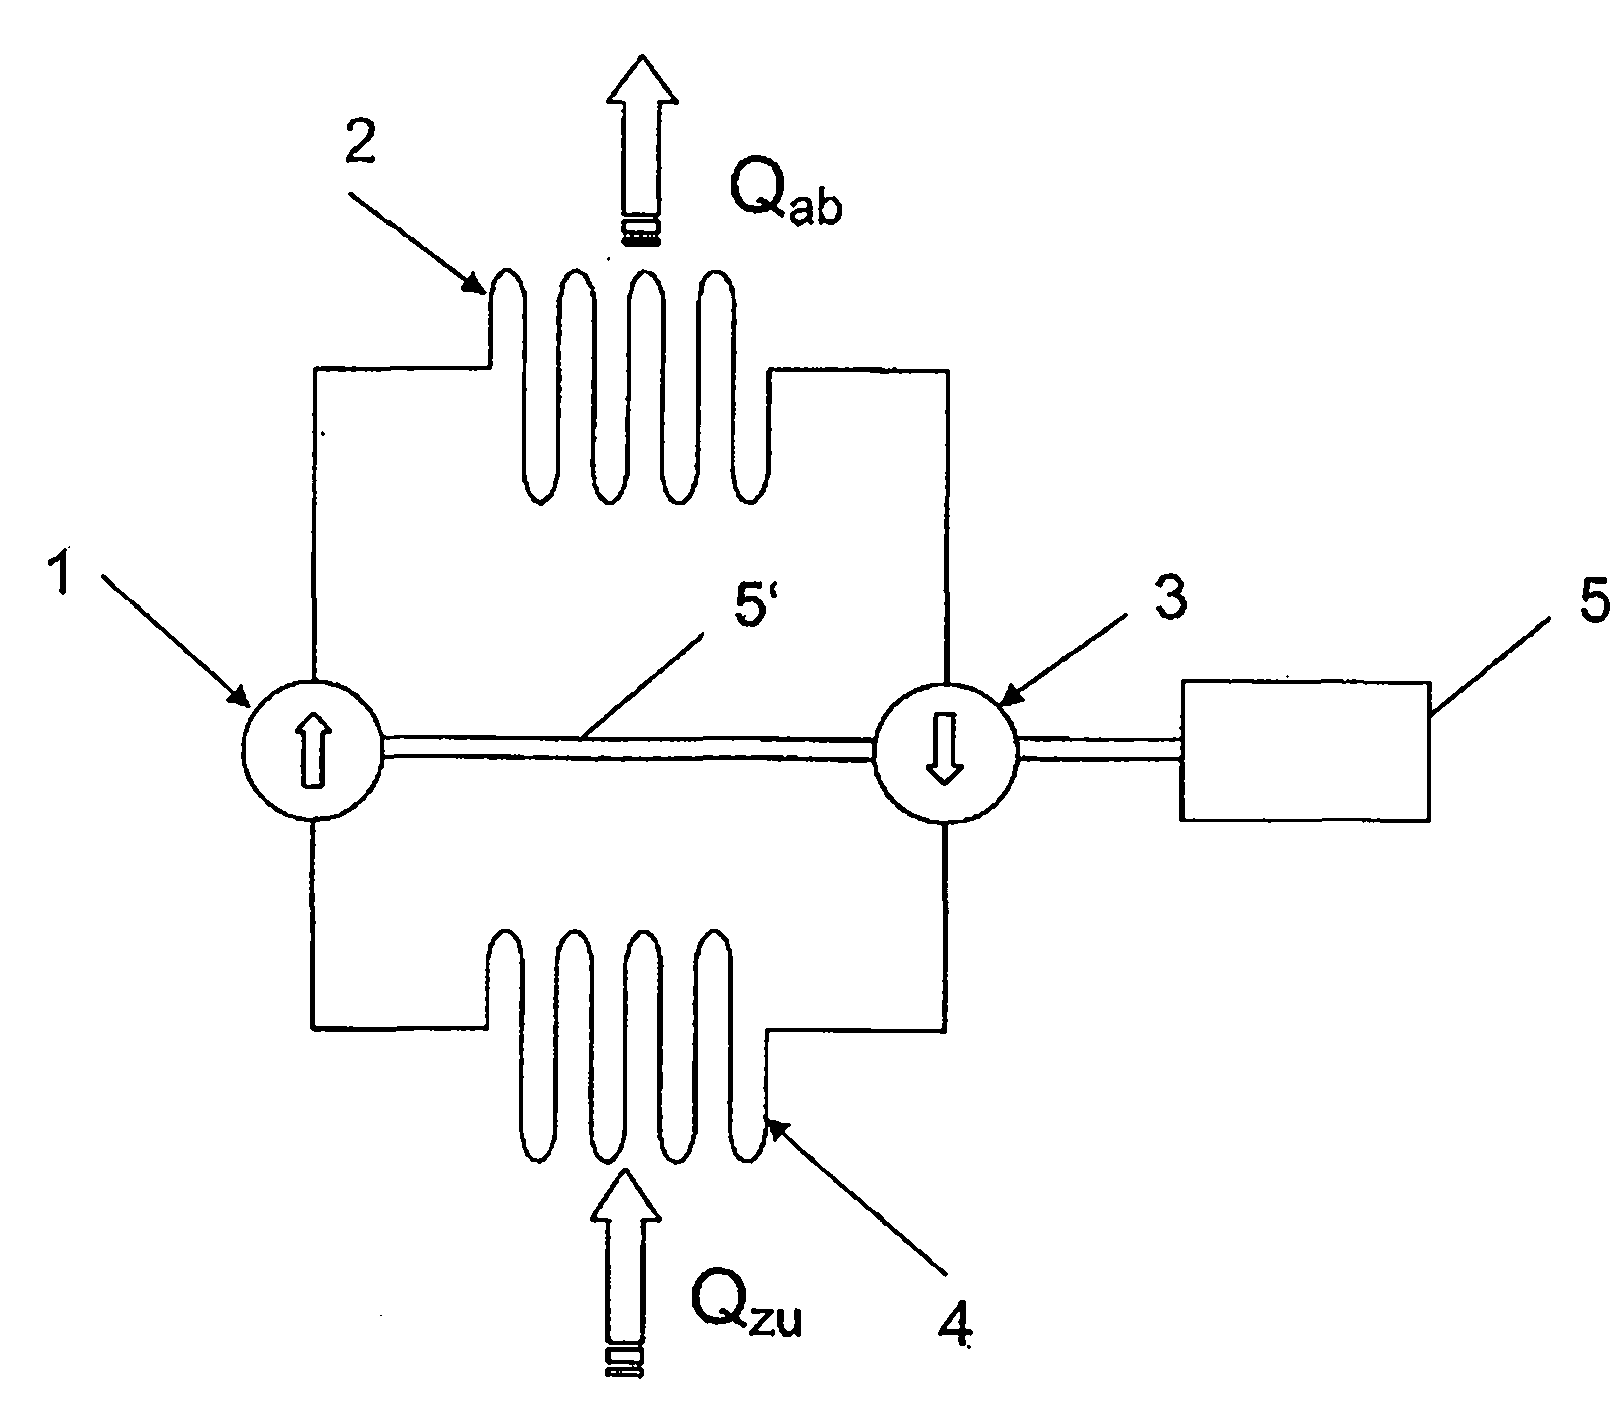 Method for converting thermal energy at a low temperature into thermal energy at a relatively high temperature by means of mechanical energy, and vice versa